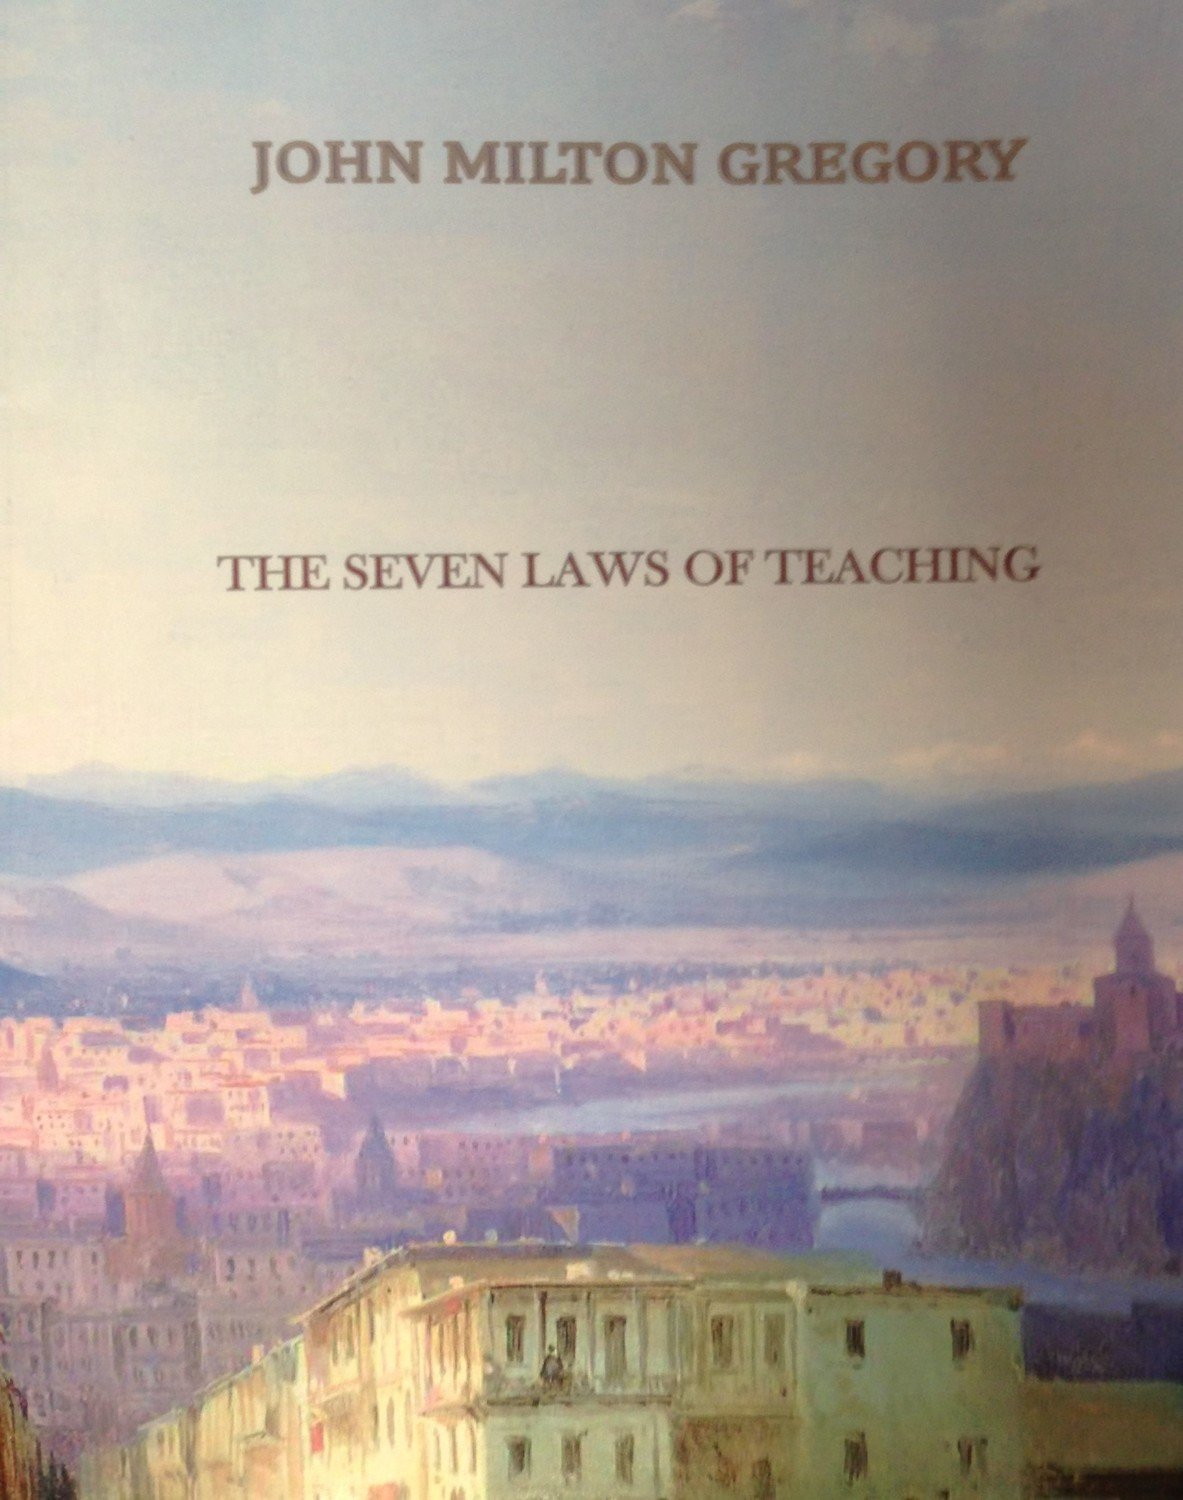 The Seven Laws of Teaching by John Milton Gregory